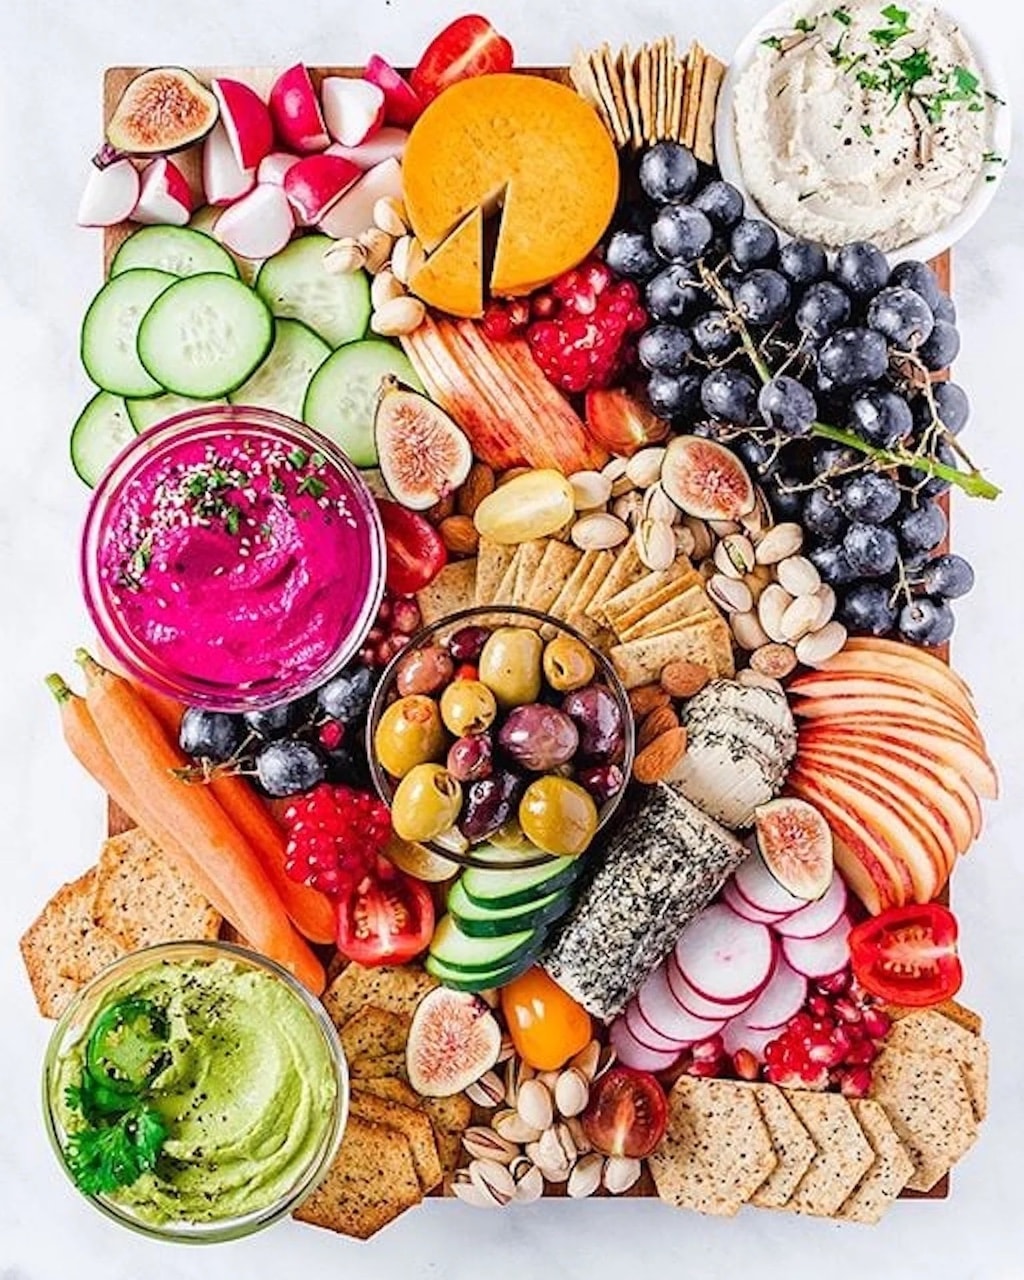 unique charcuterie boards ideas for the holidays vegan rainbow